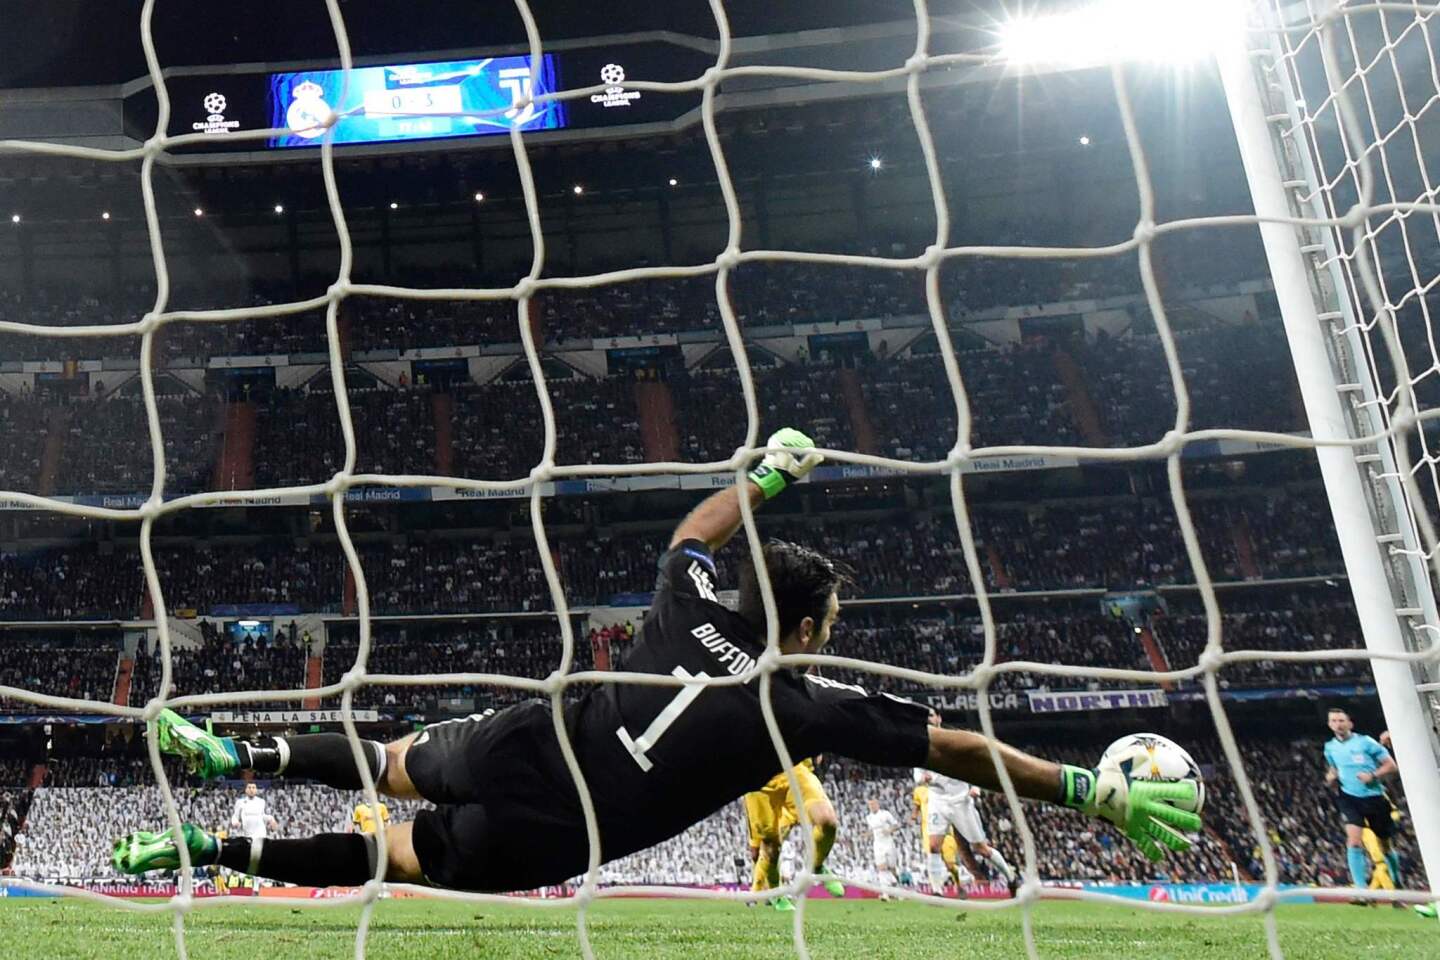 Juventus' Italian goalkeeper Gianluigi Buffon dives for the ball during the UEFA Champions League quarter-final second leg football match between Real Madrid CF and Juventus FC at the Santiago Bernabeu stadium in Madrid on April 11, 2018. / AFP PHOTO / JAVIER SORIANOJAVIER SORIANO/AFP/Getty Images ** OUTS - ELSENT, FPG, CM - OUTS * NM, PH, VA if sourced by CT, LA or MoD **